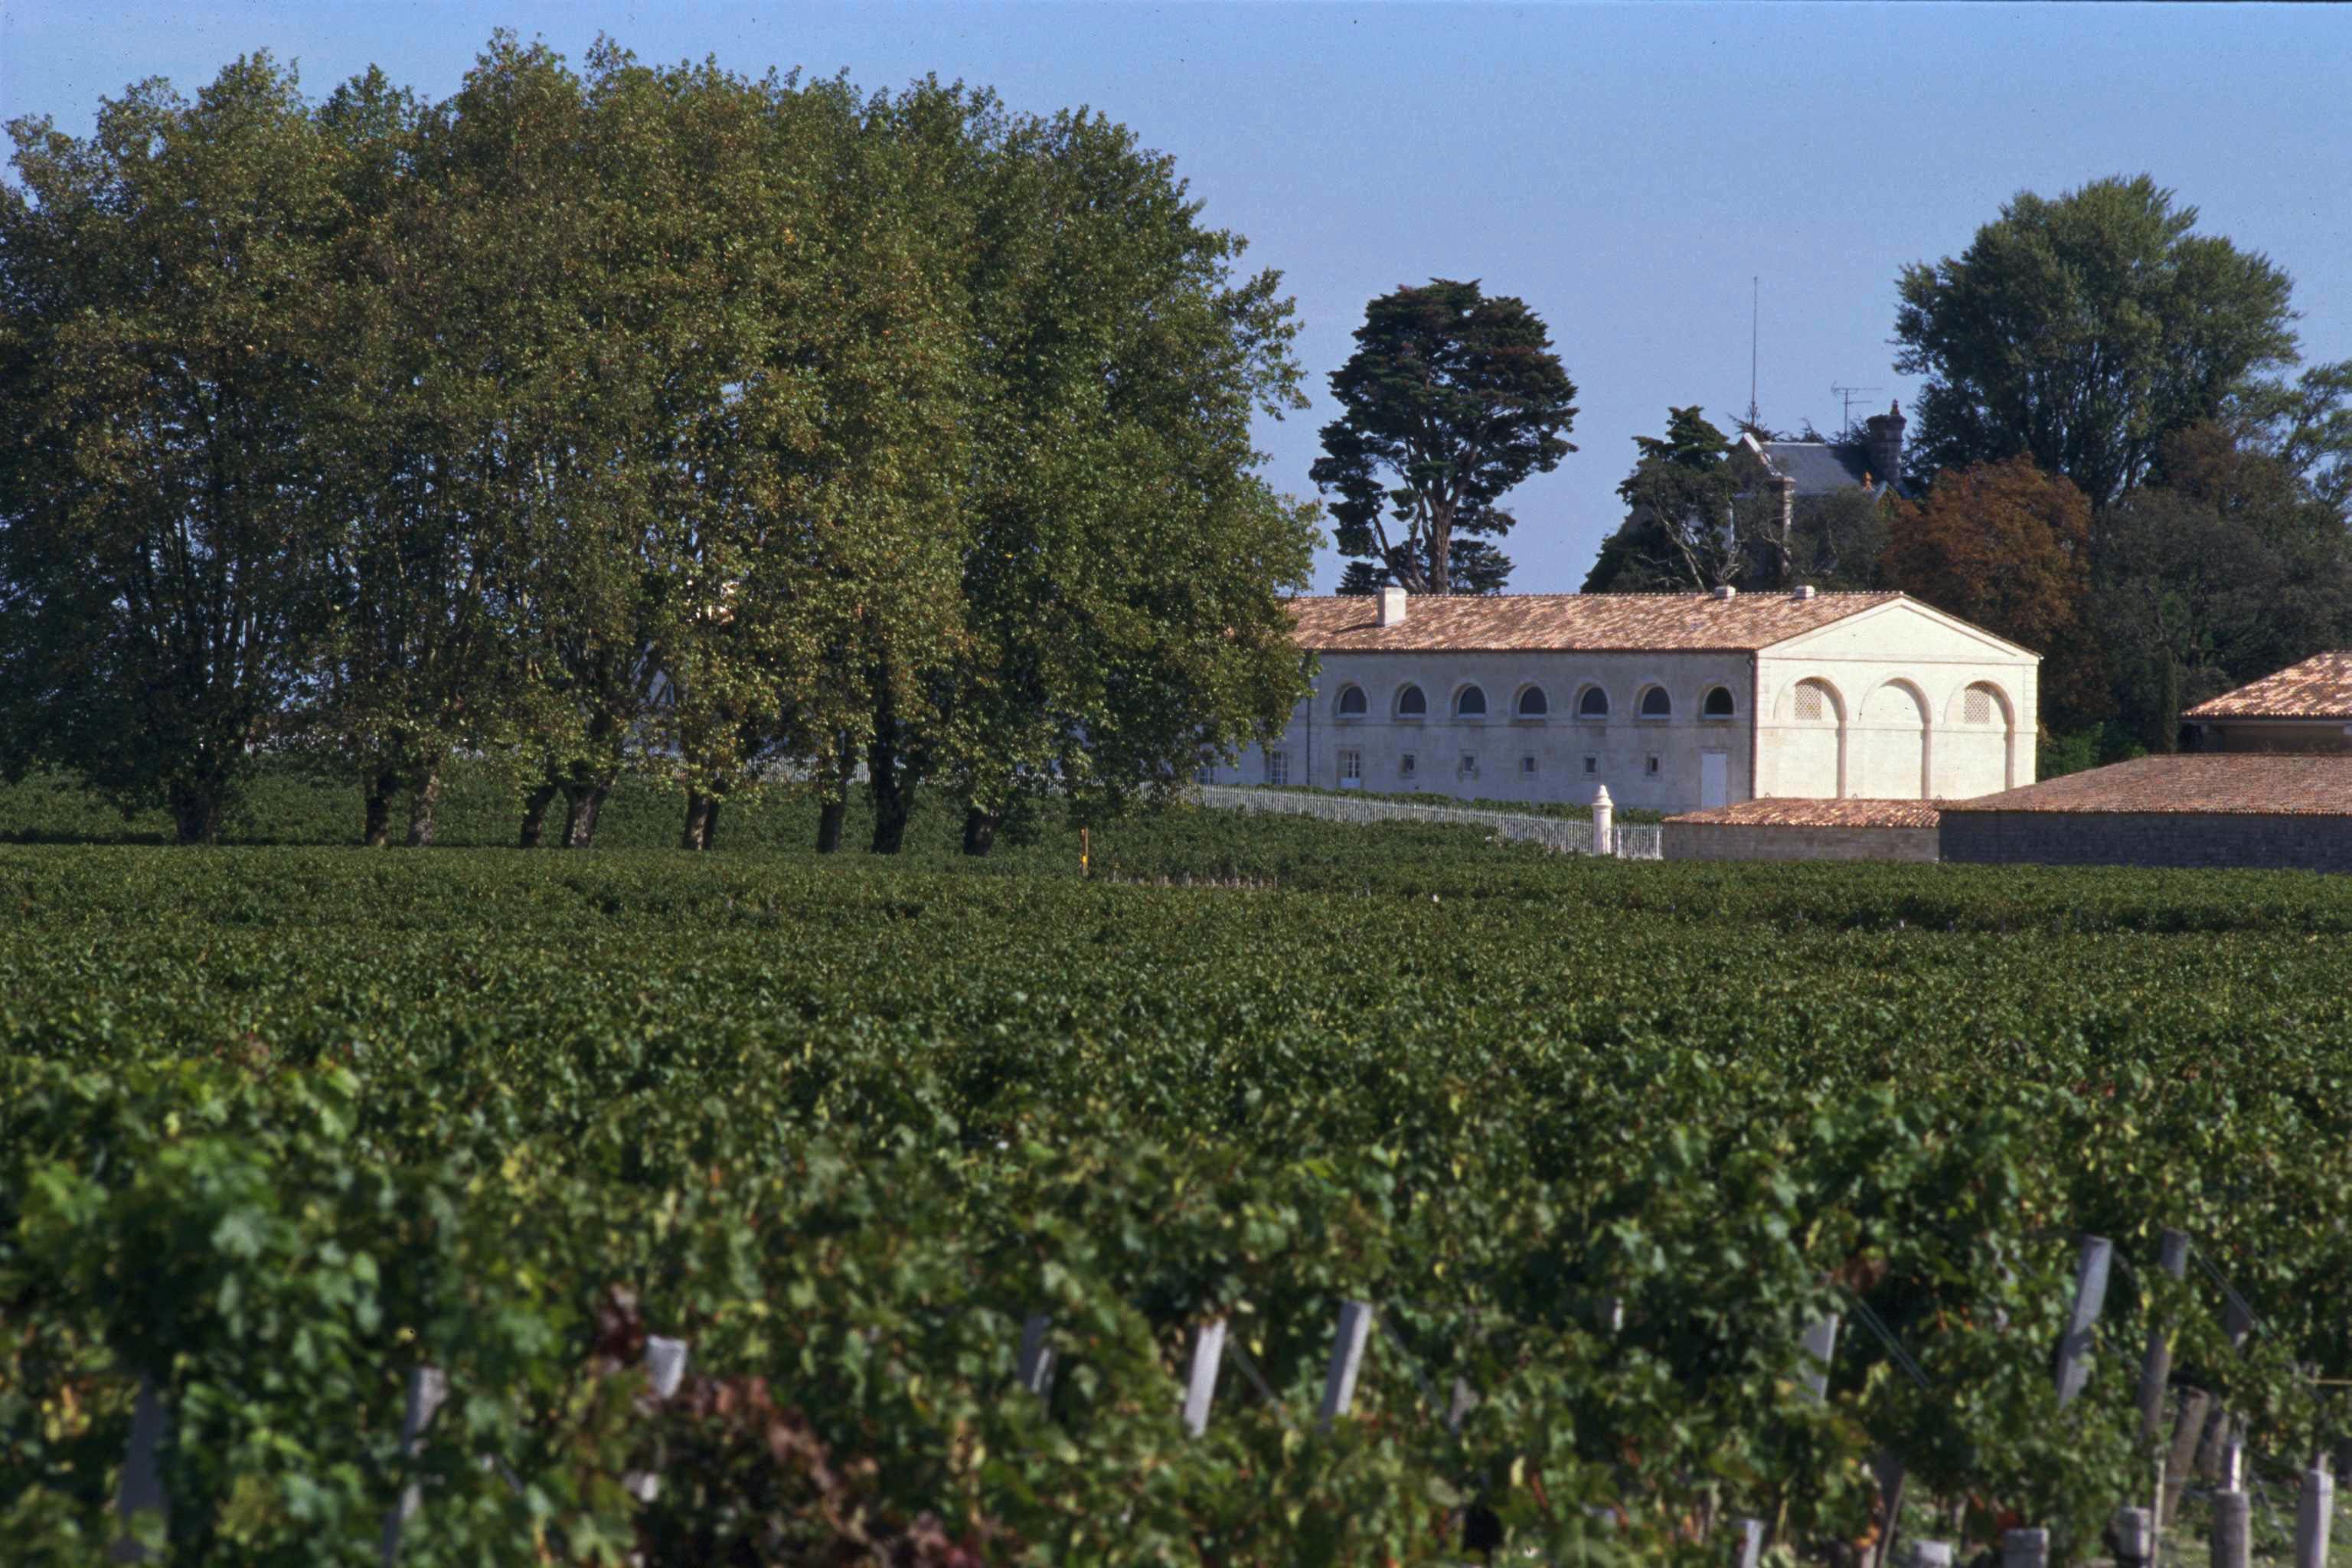 The vineyards and chateau of Mouton Rothschild stand in the Bordeaux region of France.